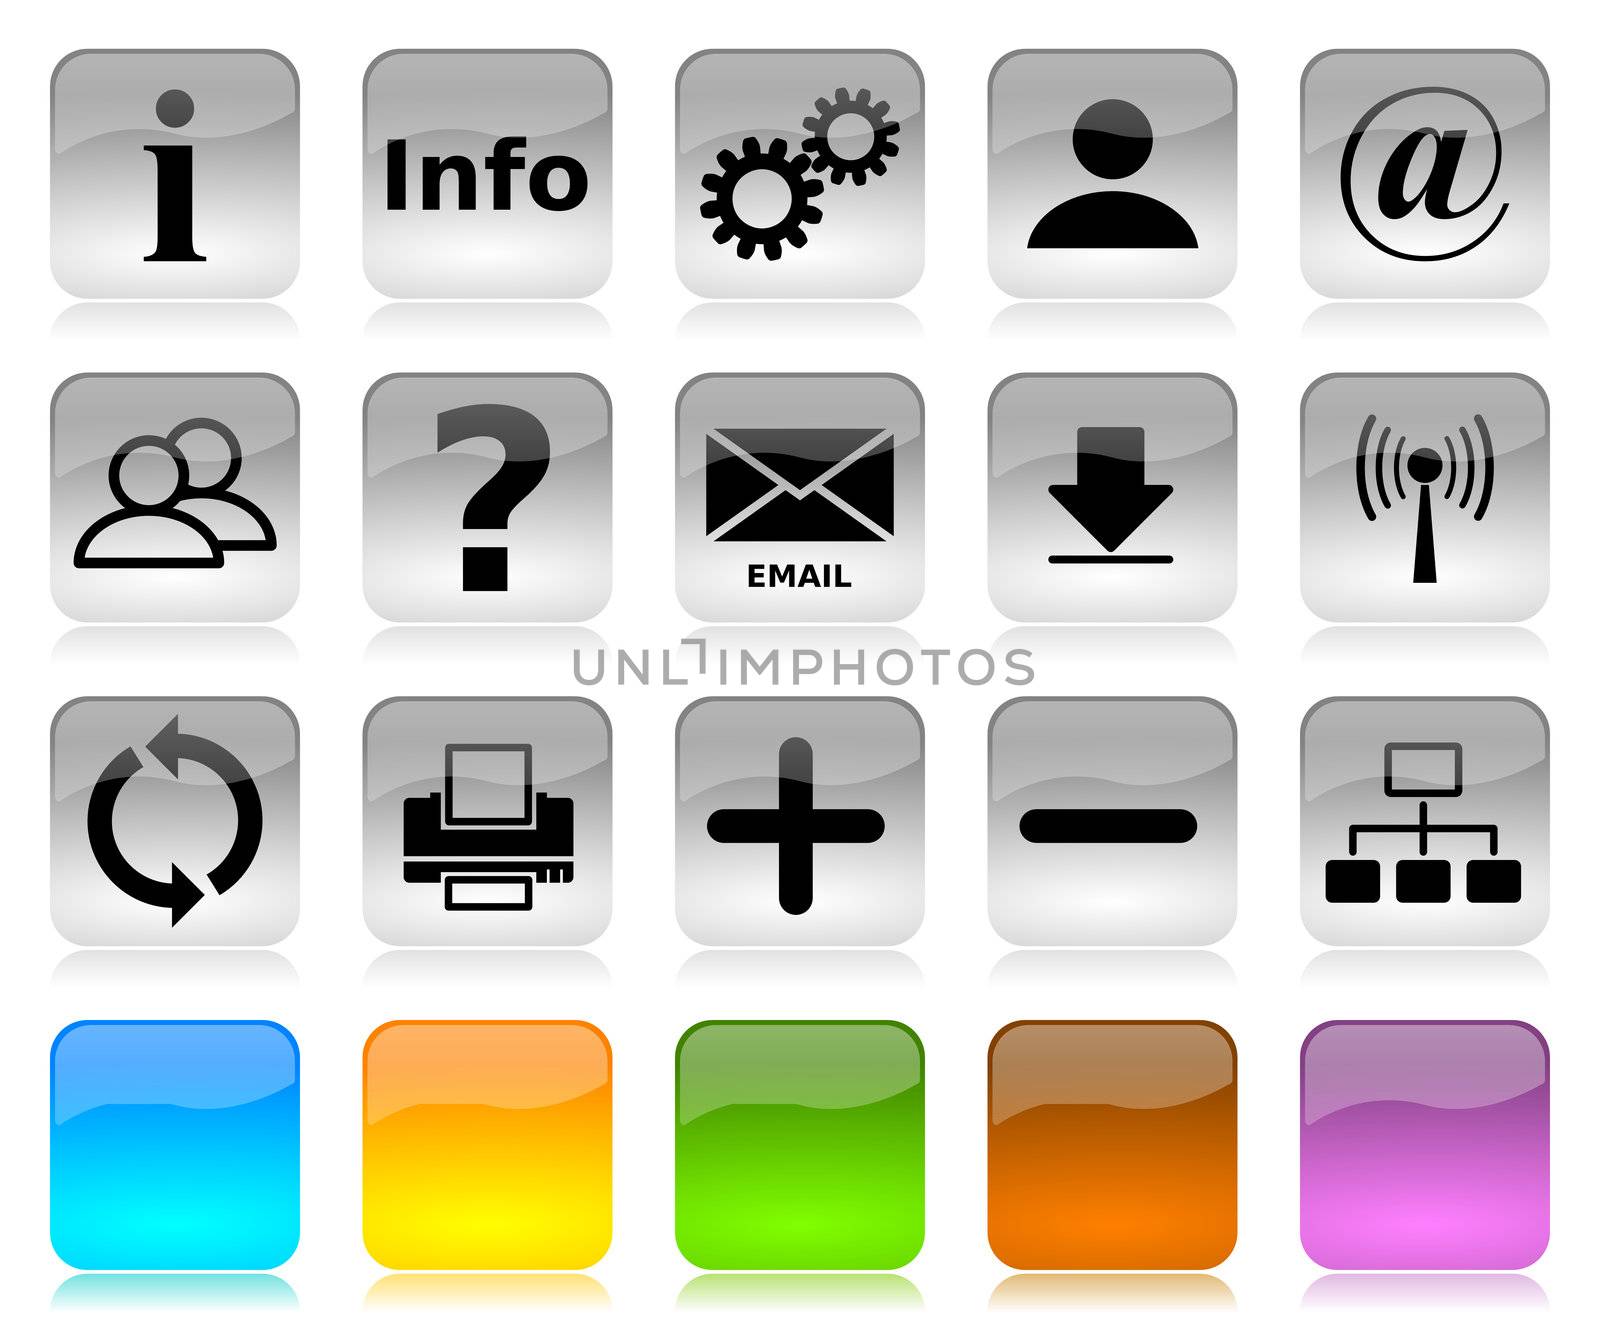 Black on white glossy internet icons series and five colors blank customizable buttons